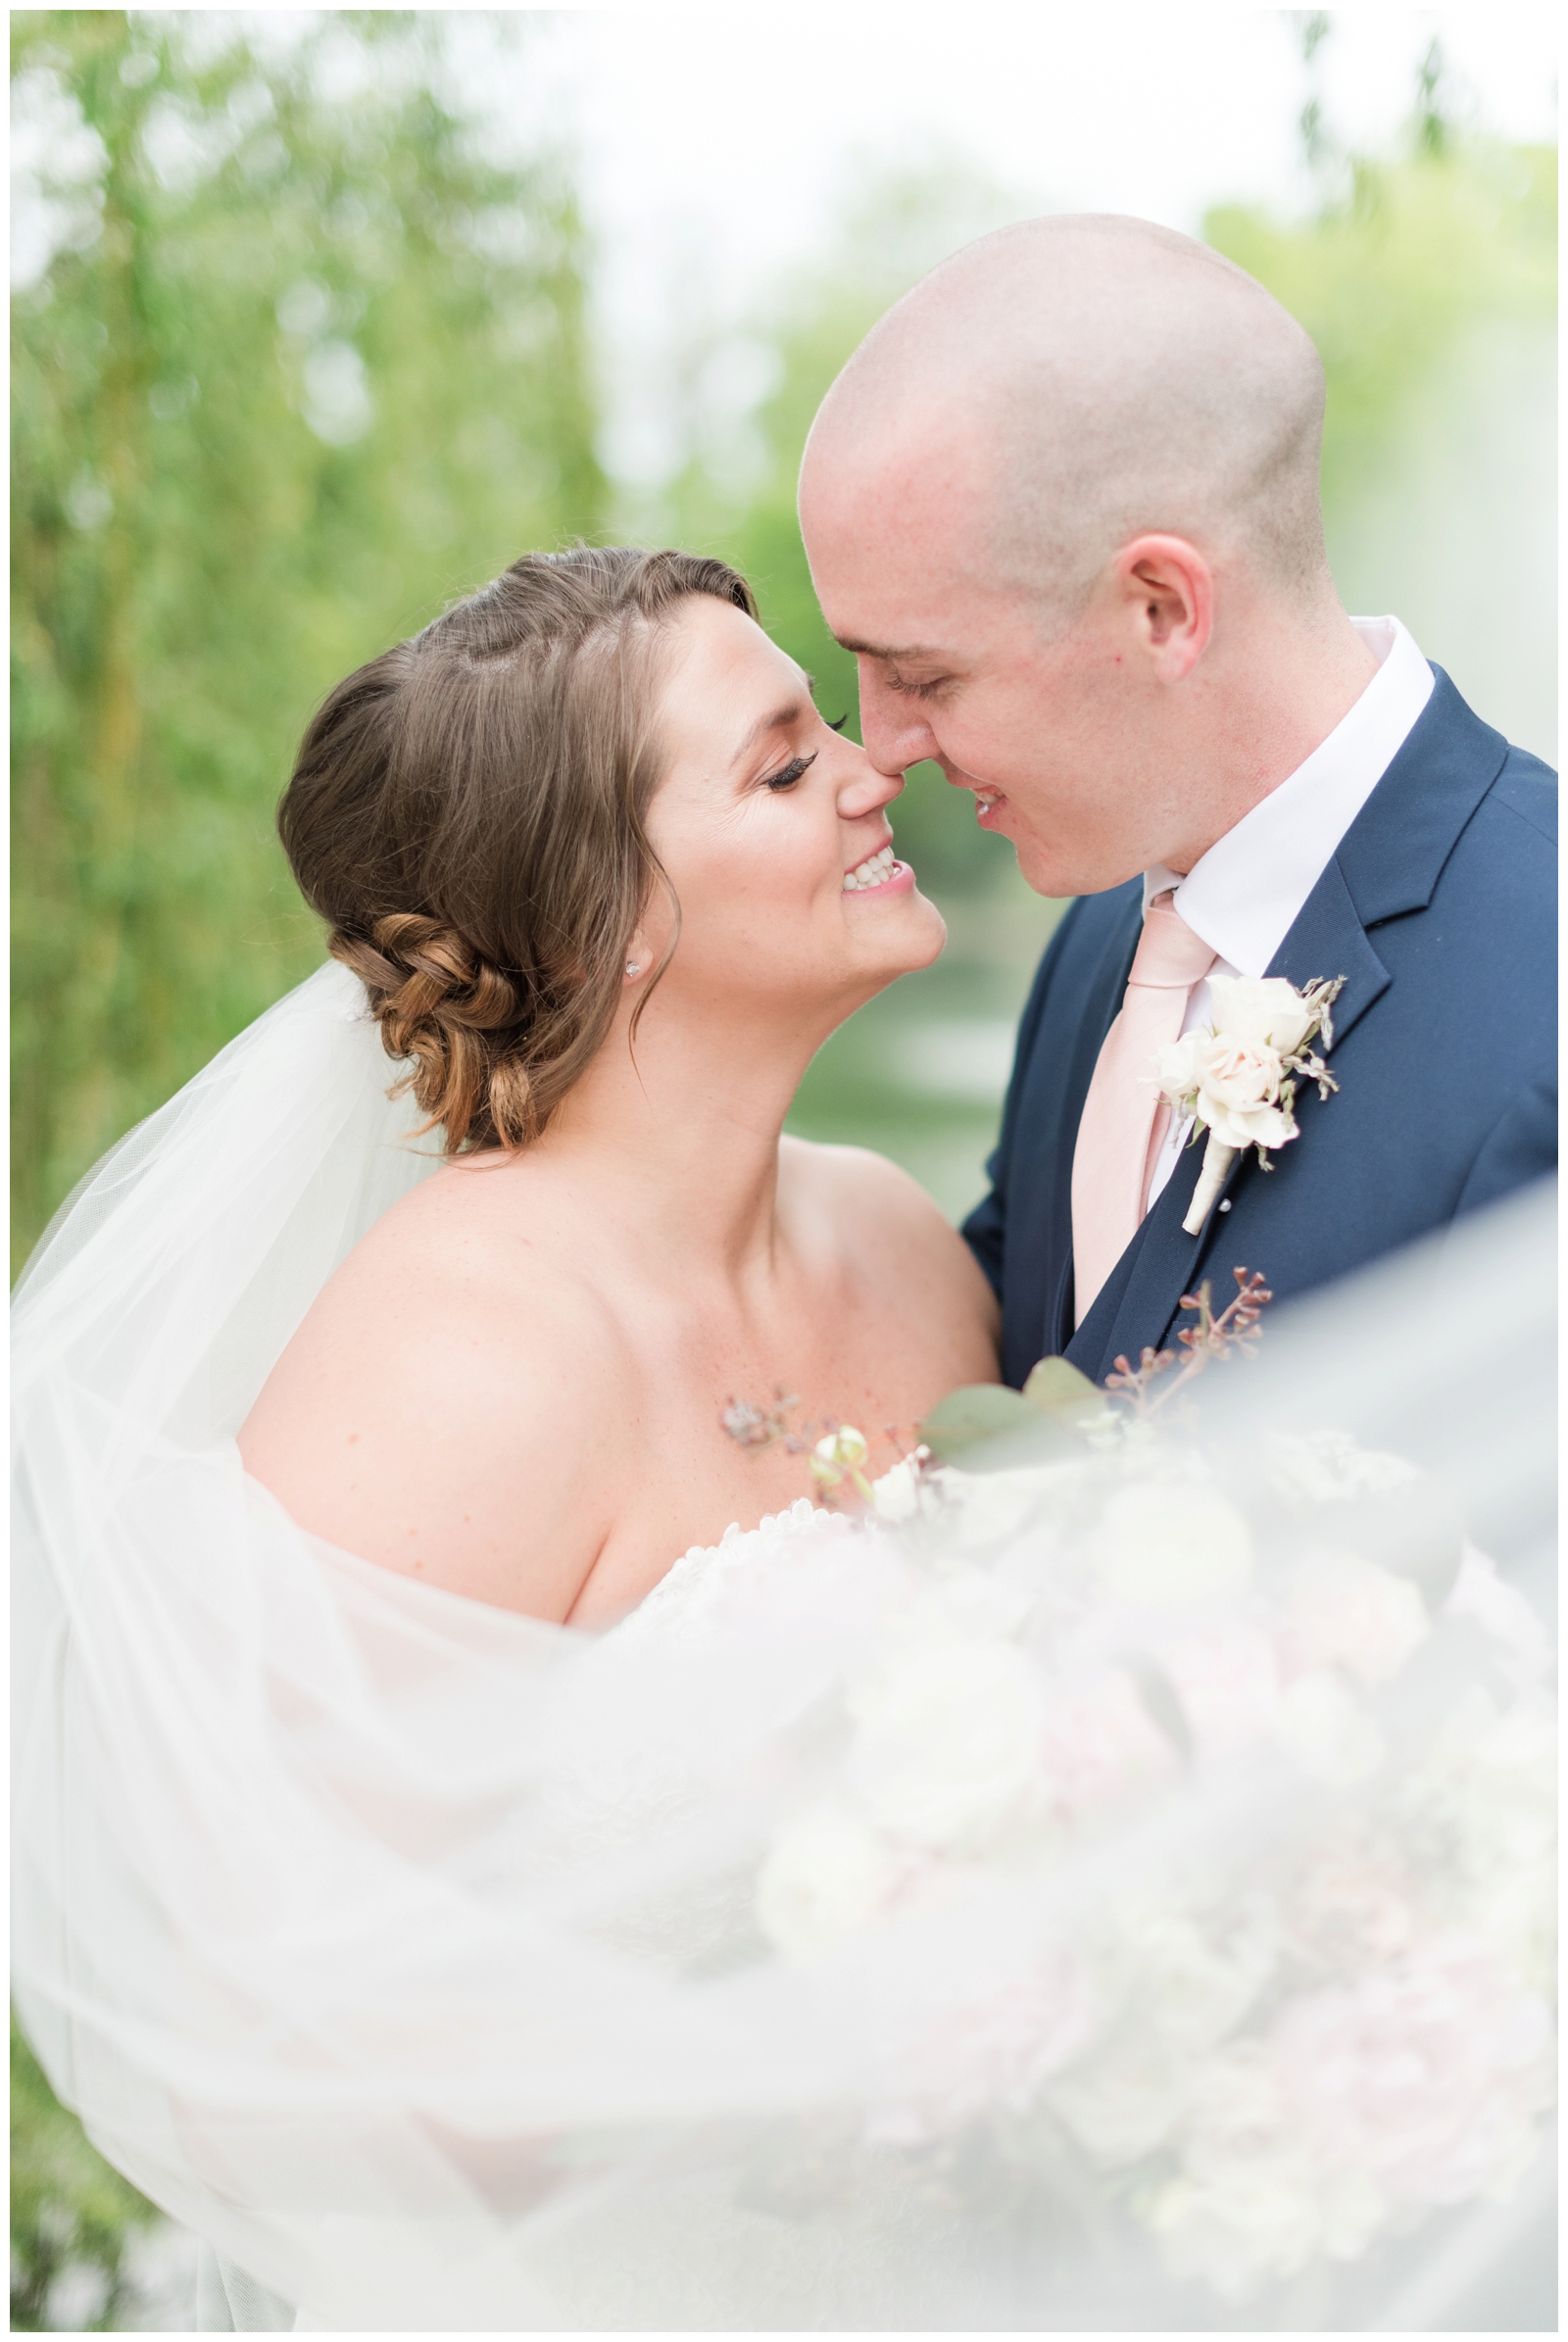 romantic wedding portrait of bride and groom nuzzling noses while her veil is draped around them